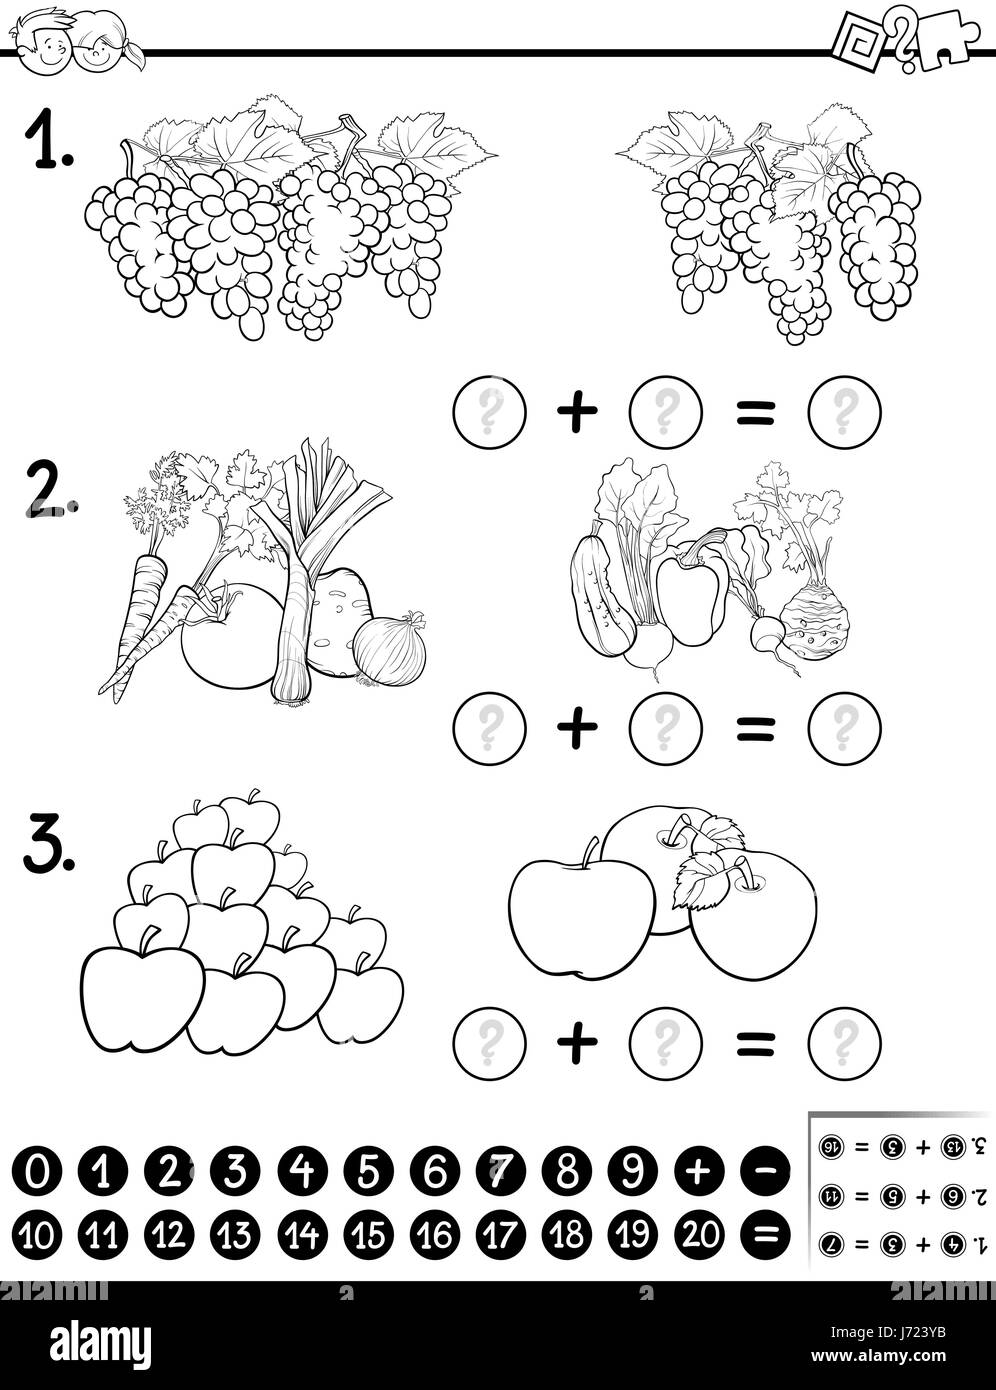 Black and White Cartoon Illustration of Educational Mathematical Activity Game for Children with Fruits and Vegetables Coloring Page Stock Vector